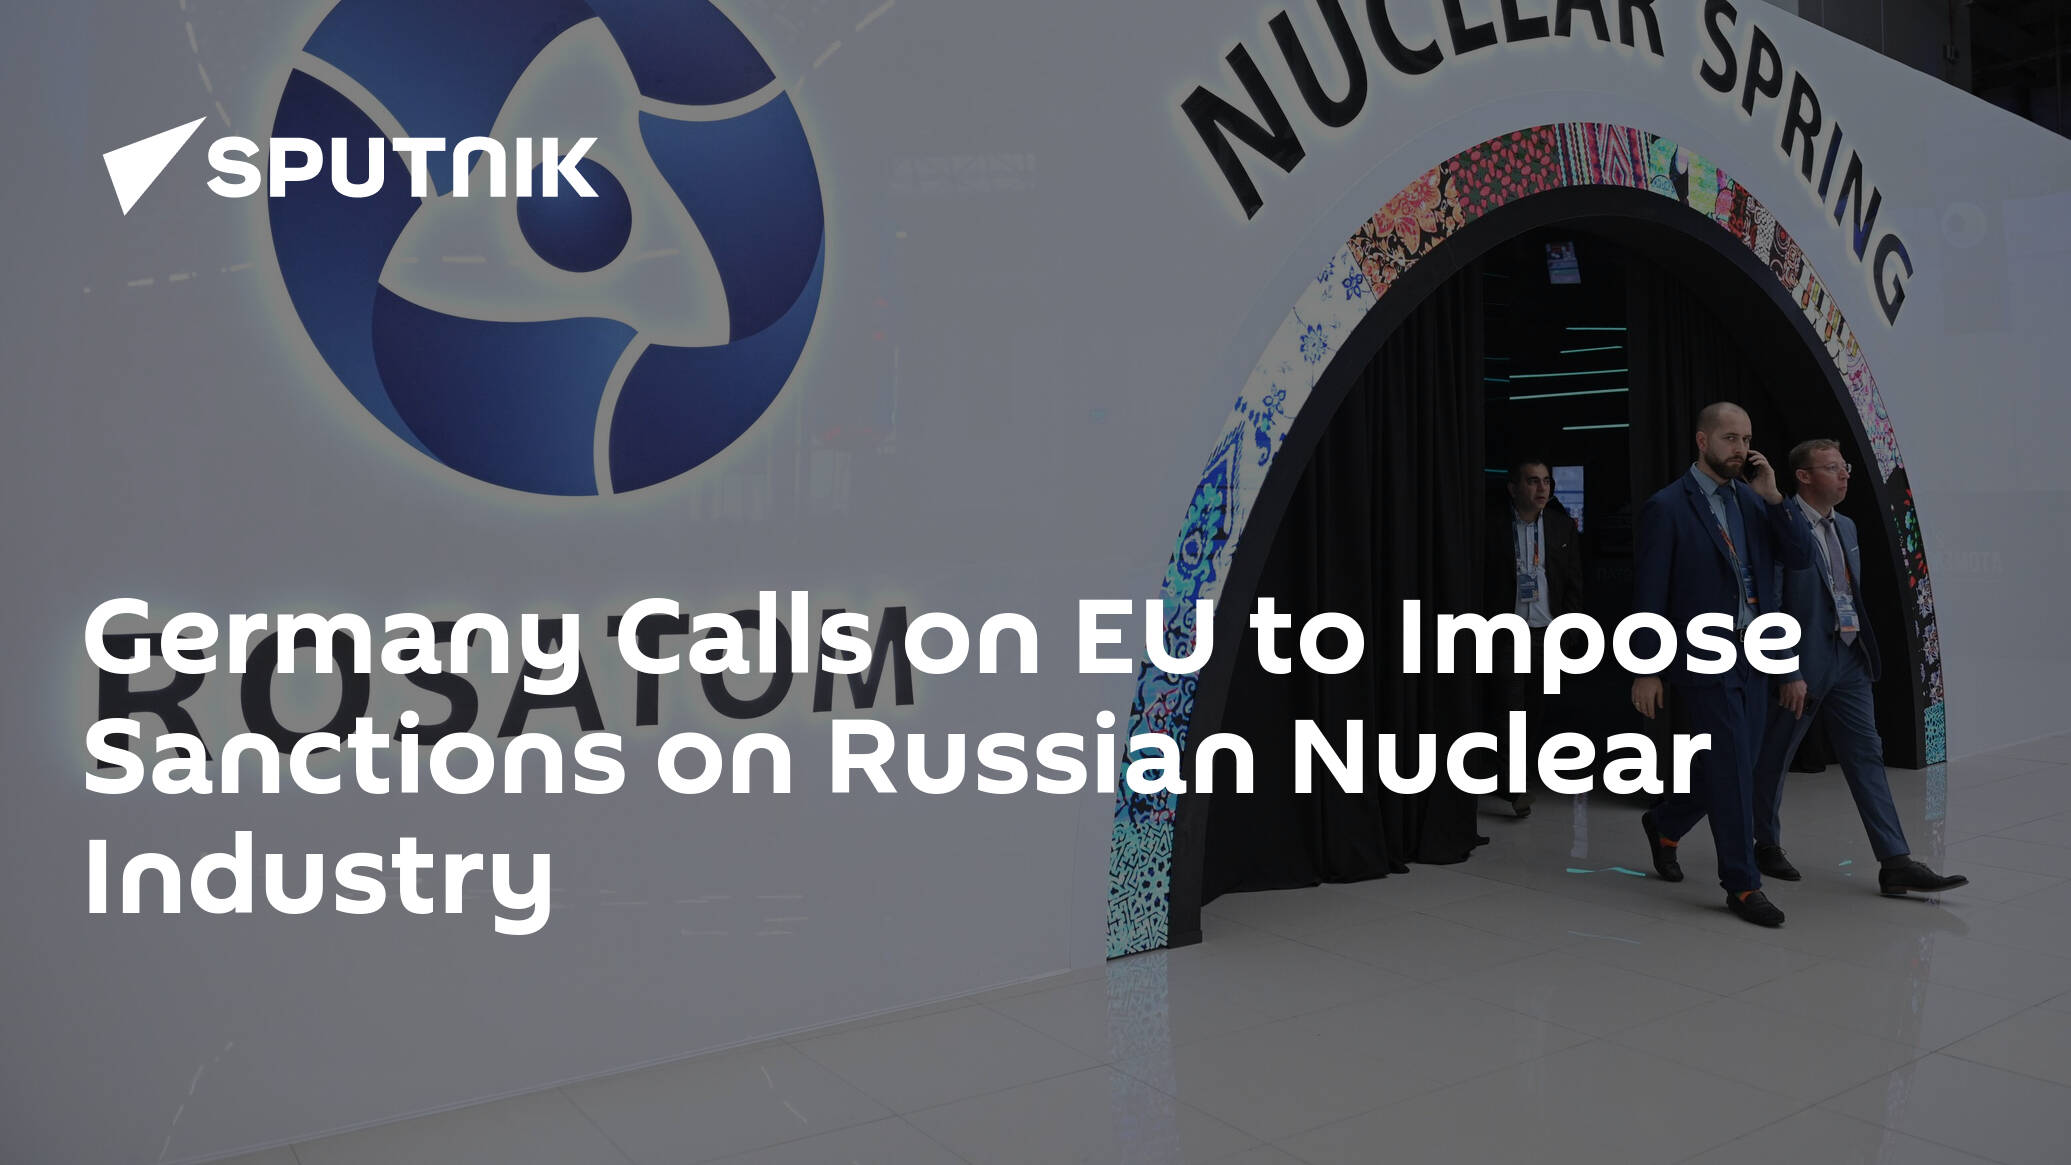 Germany Calls on EU to Impose Sanctions on Russian Nuclear Industry